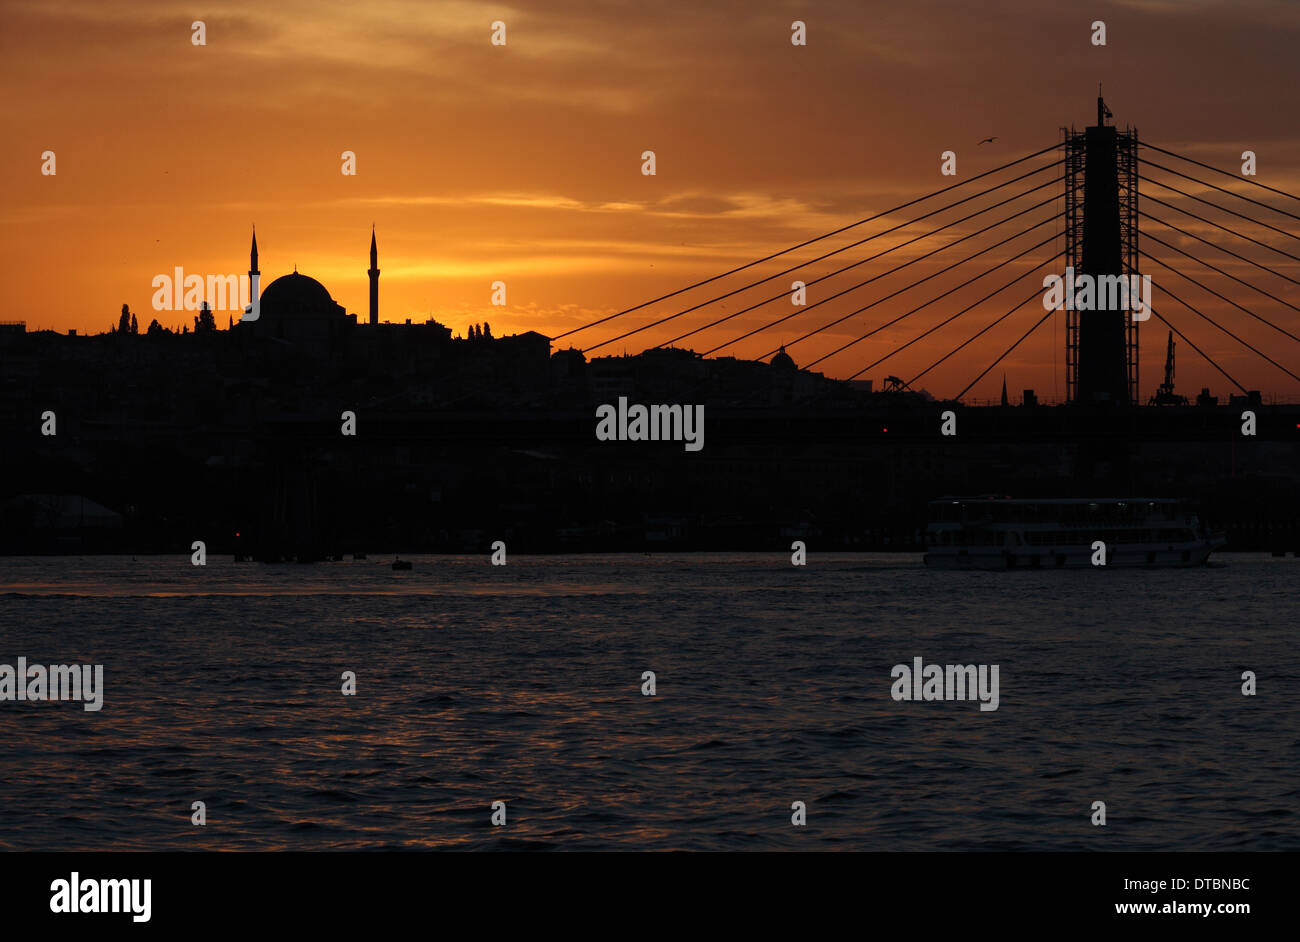 Silhouette of the Fatih Mosque at sunset Stock Photo